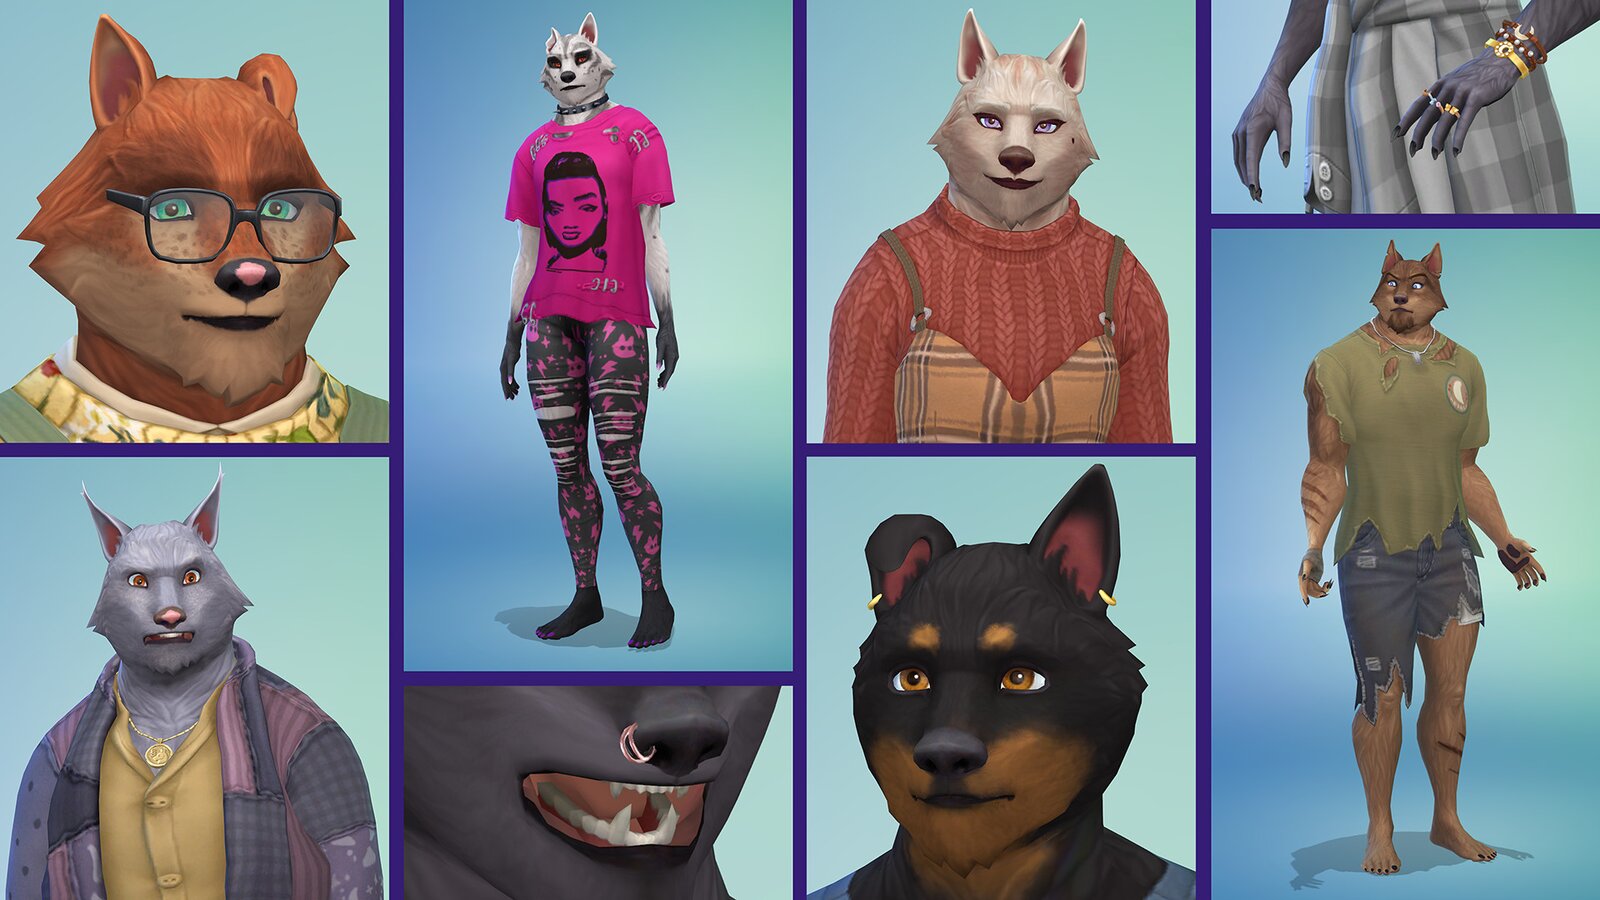 The Sims 4 - Werewolves